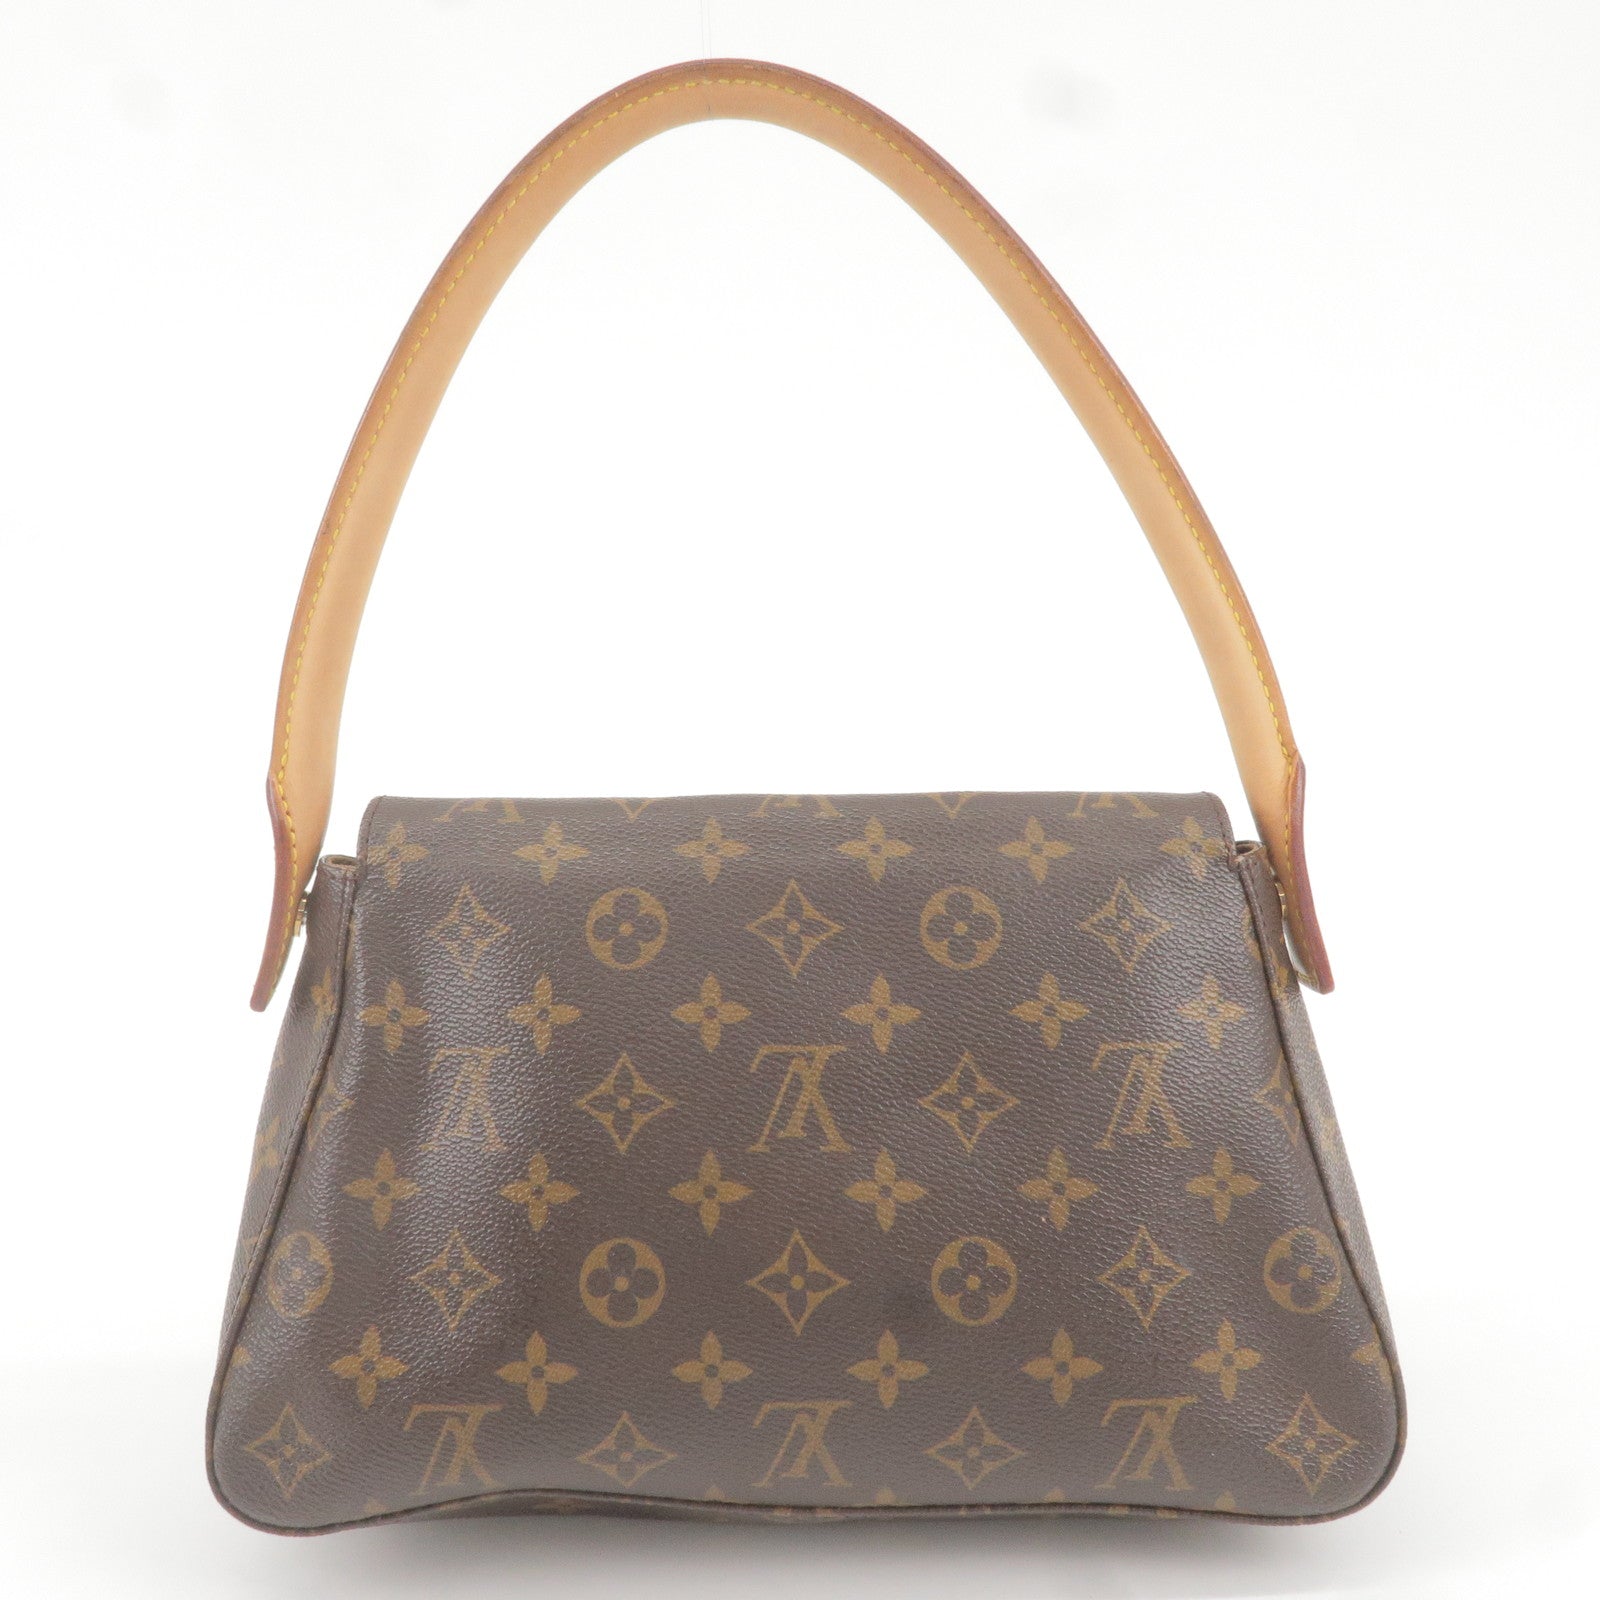 Louis Vuitton Lucille second hand prices